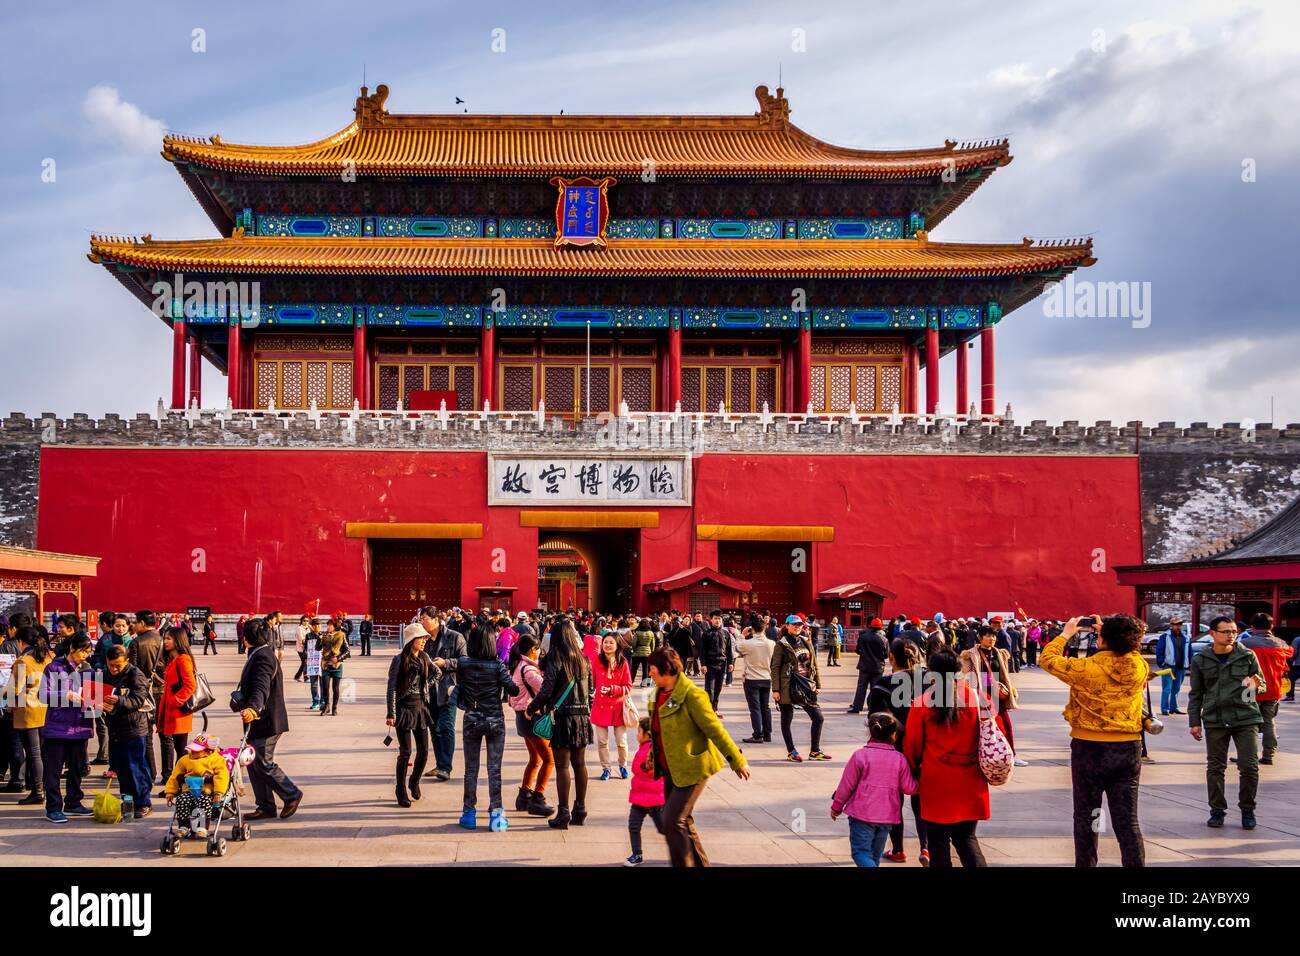 Crowd of tourists visiting Forbidden City, front view on entrance Stock Photo